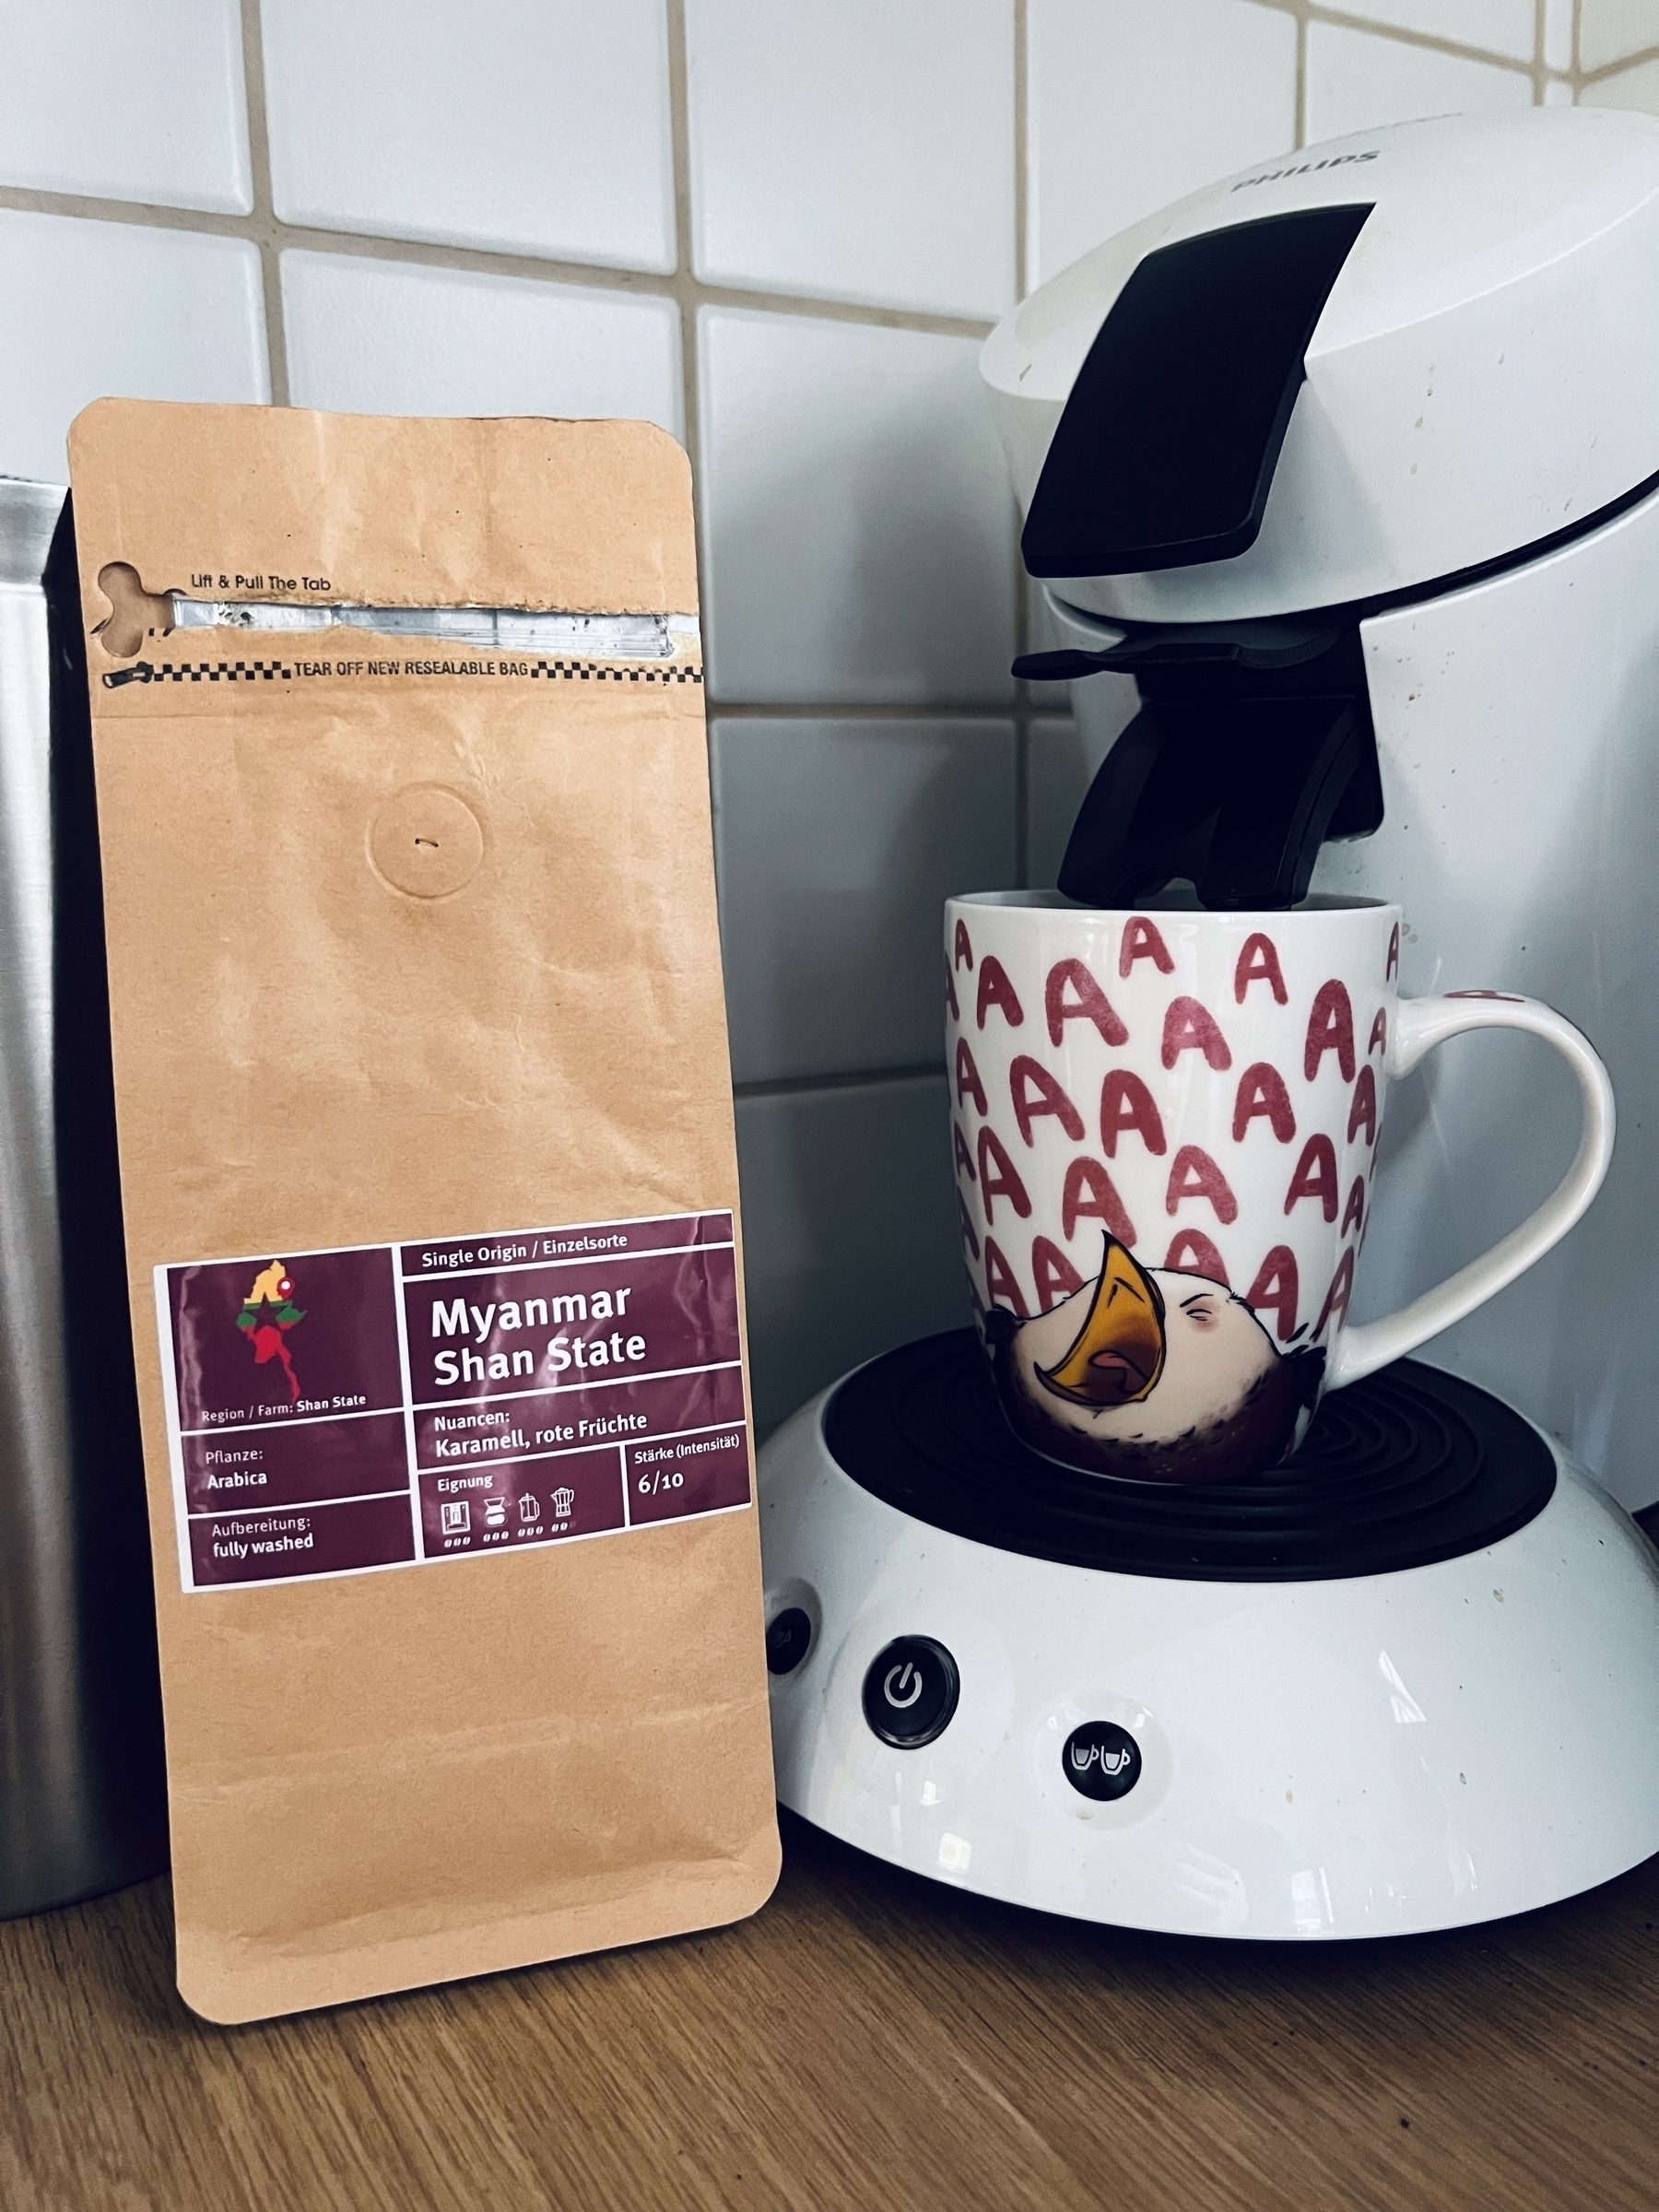 Small coffee packet standing next to a Philips Senseo coffee maker. The coffee maker has a mug on it showing a bird screaming in frustration surrounded by large letters A.